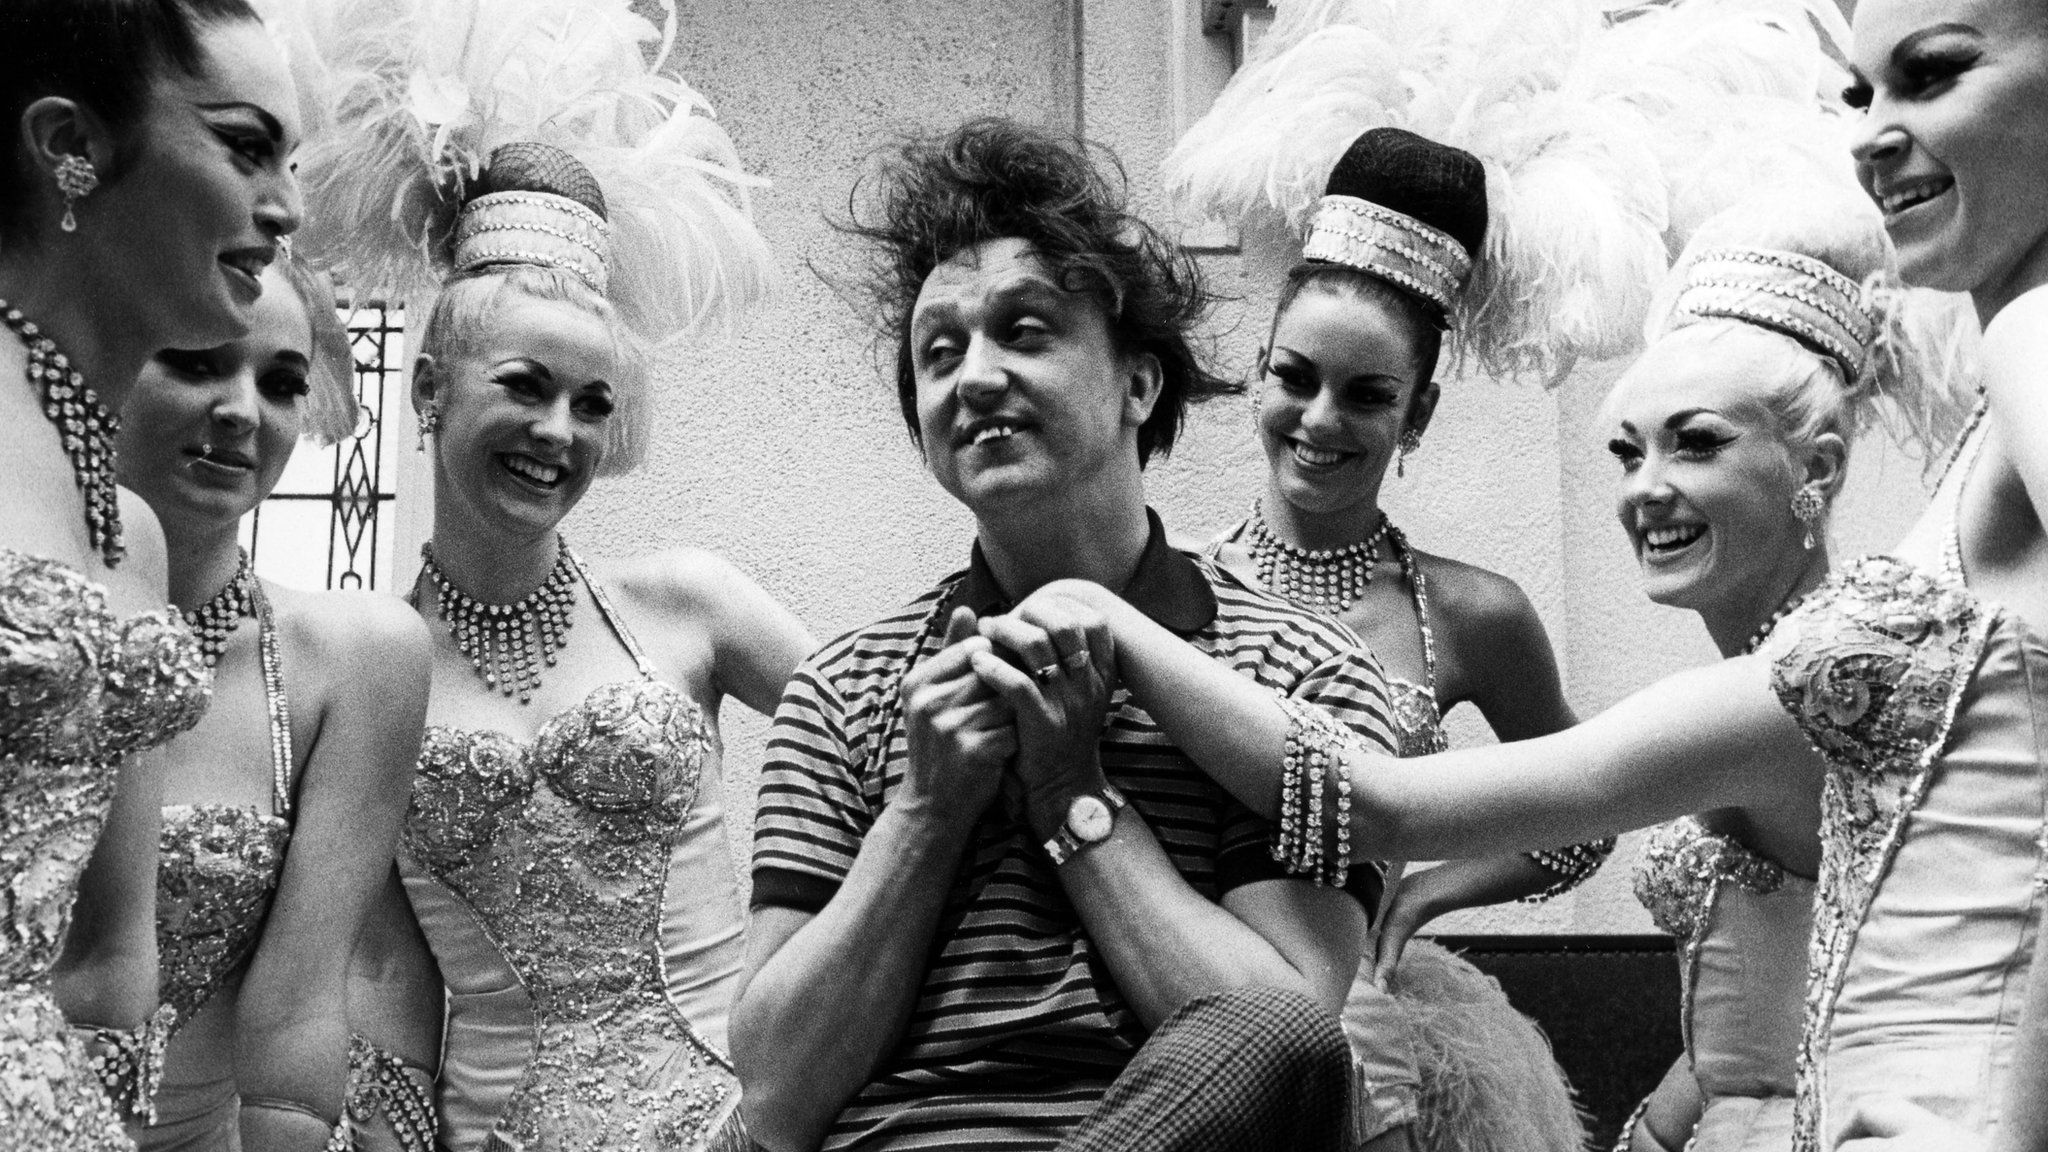 Ken Dodd with the Bluebell Girls, who accompanied him in Blackpool in 1966